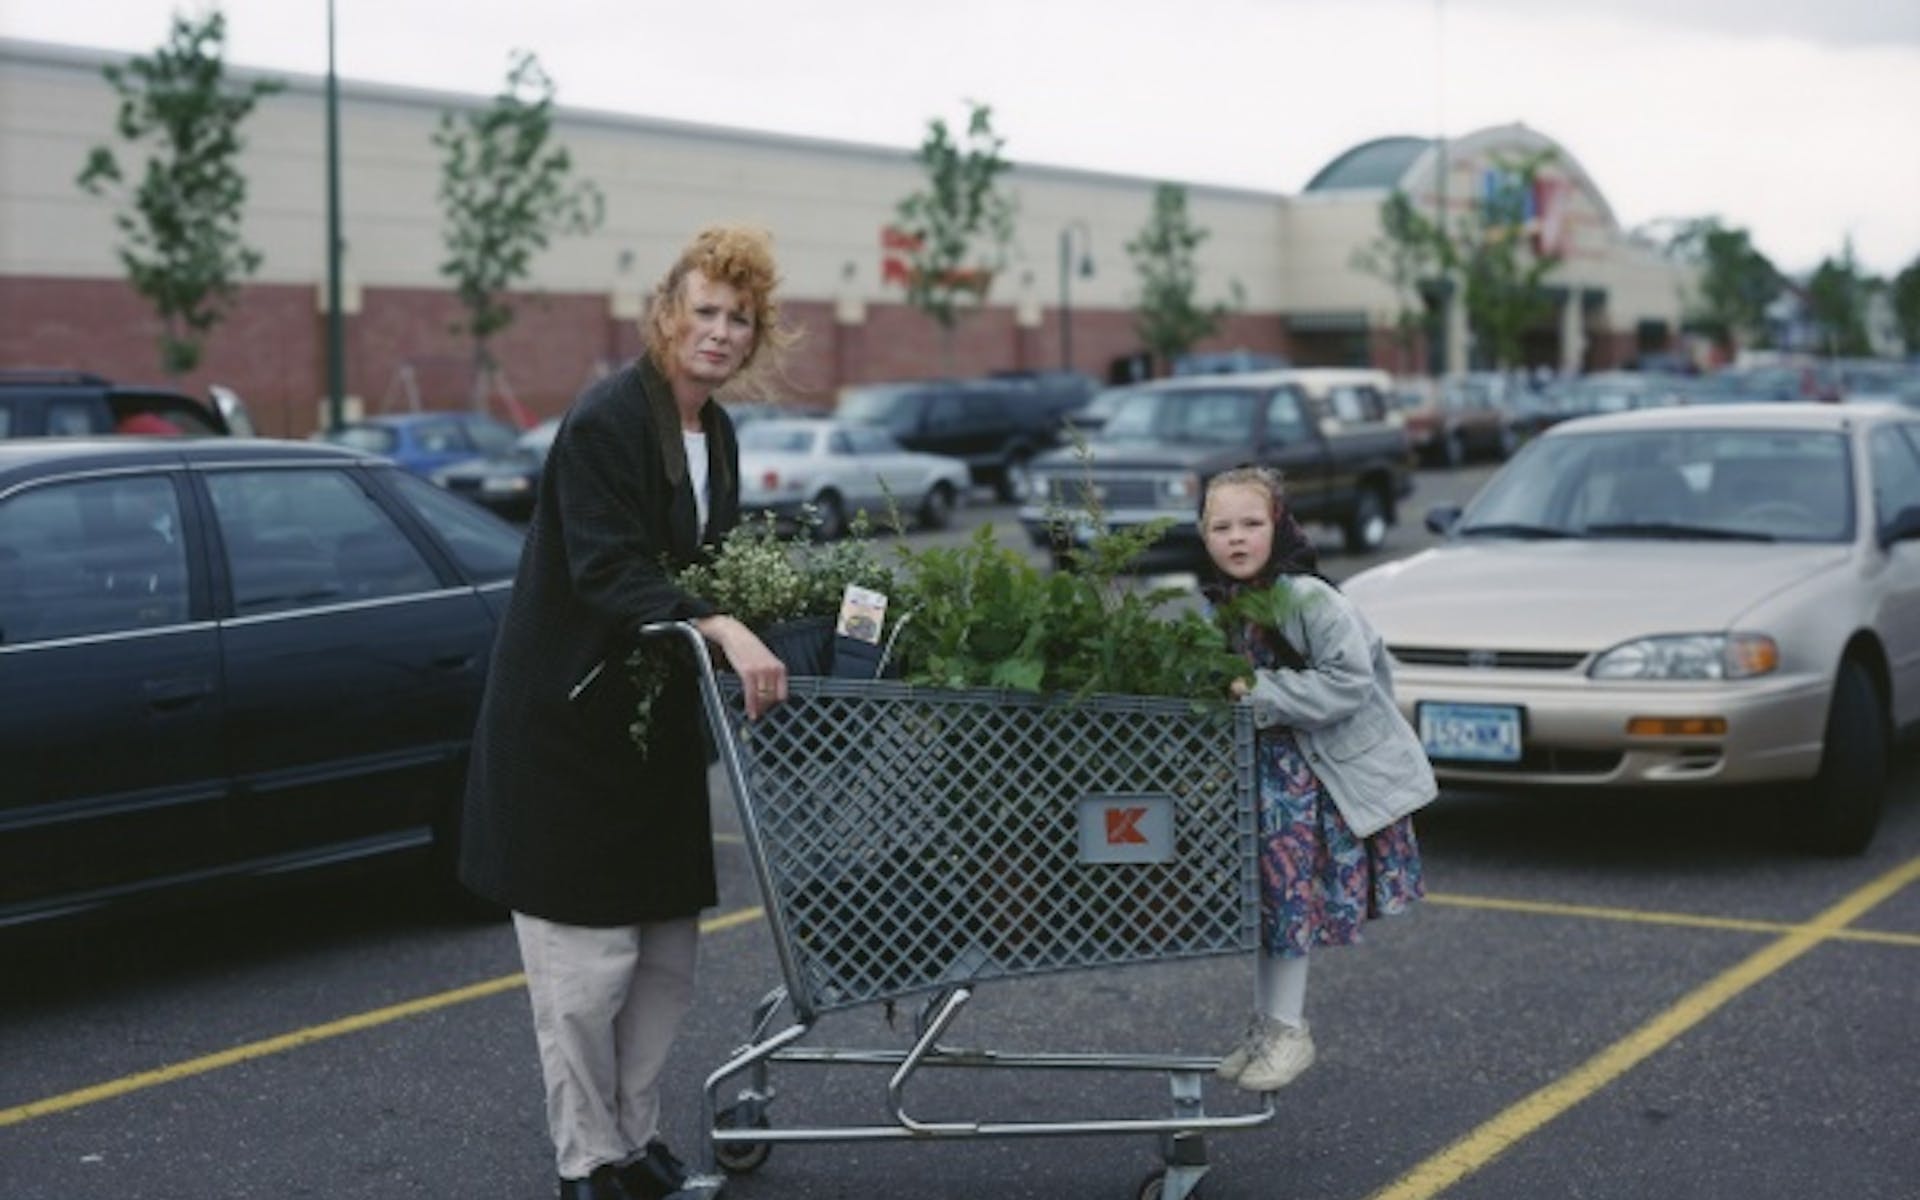 Alec Soth, Mother and Daughter, St. Paul, Minnesota, 1999